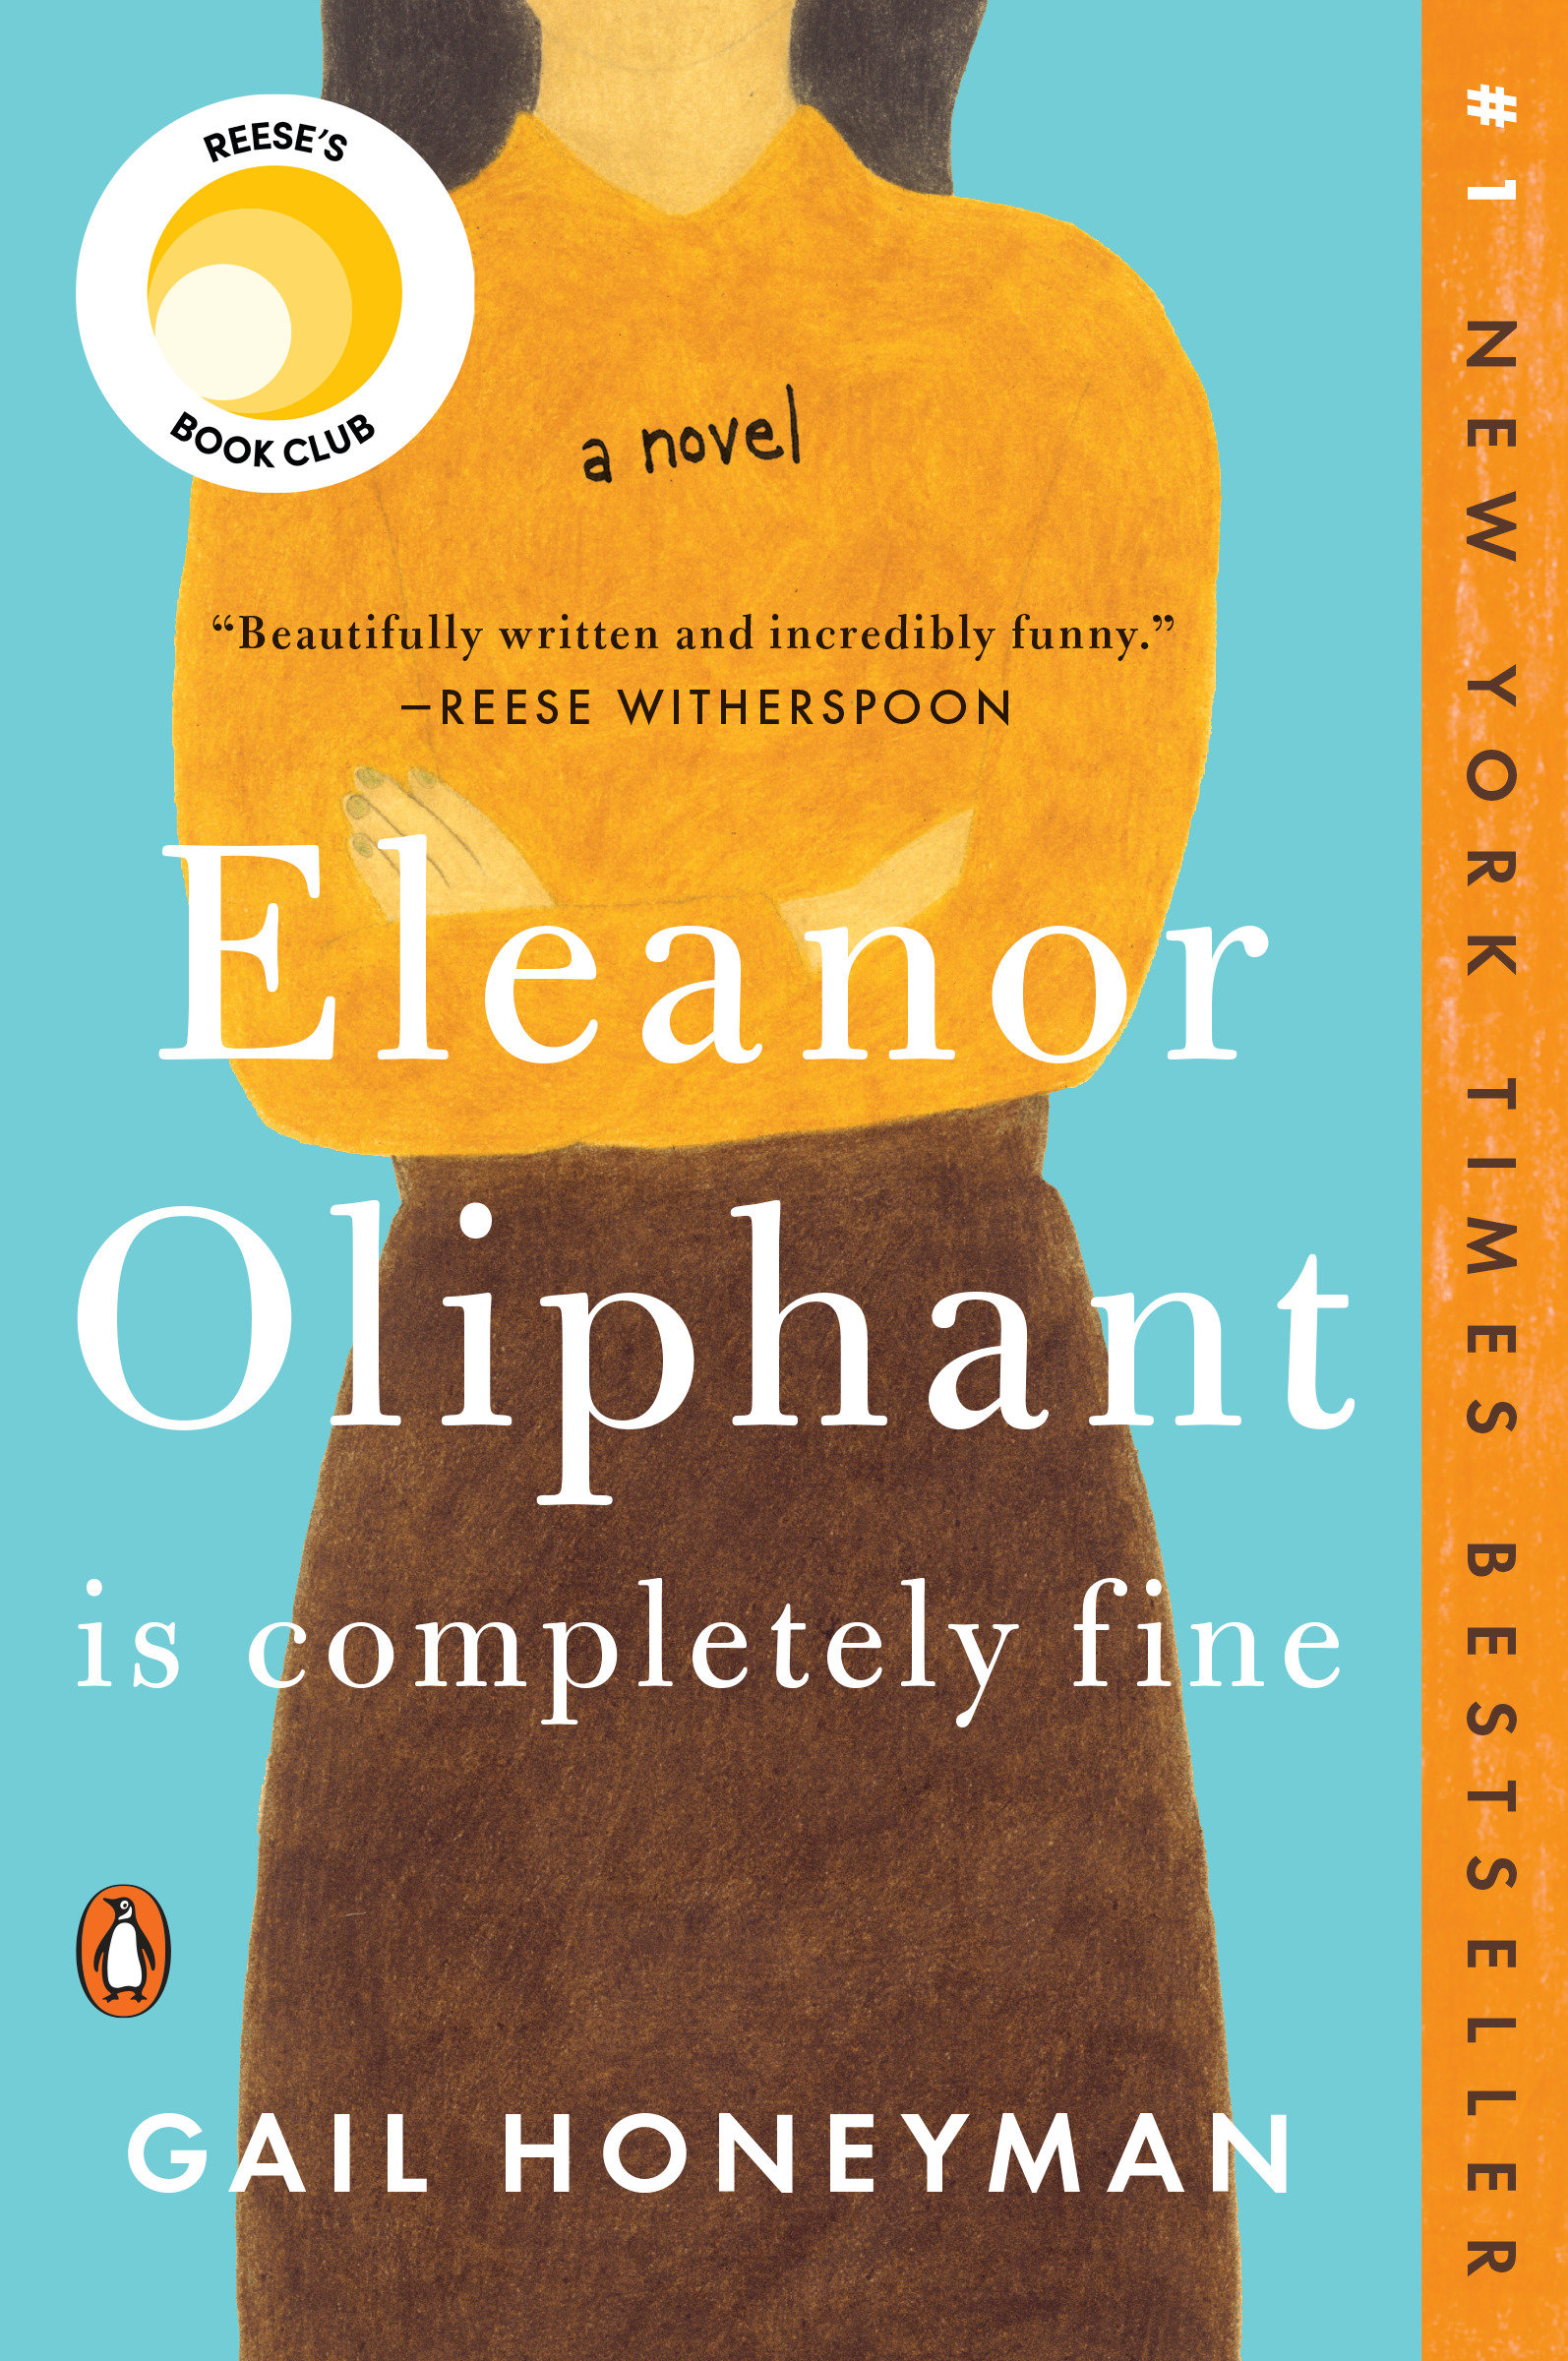 Eleanor Oliphant is completely fine cover image